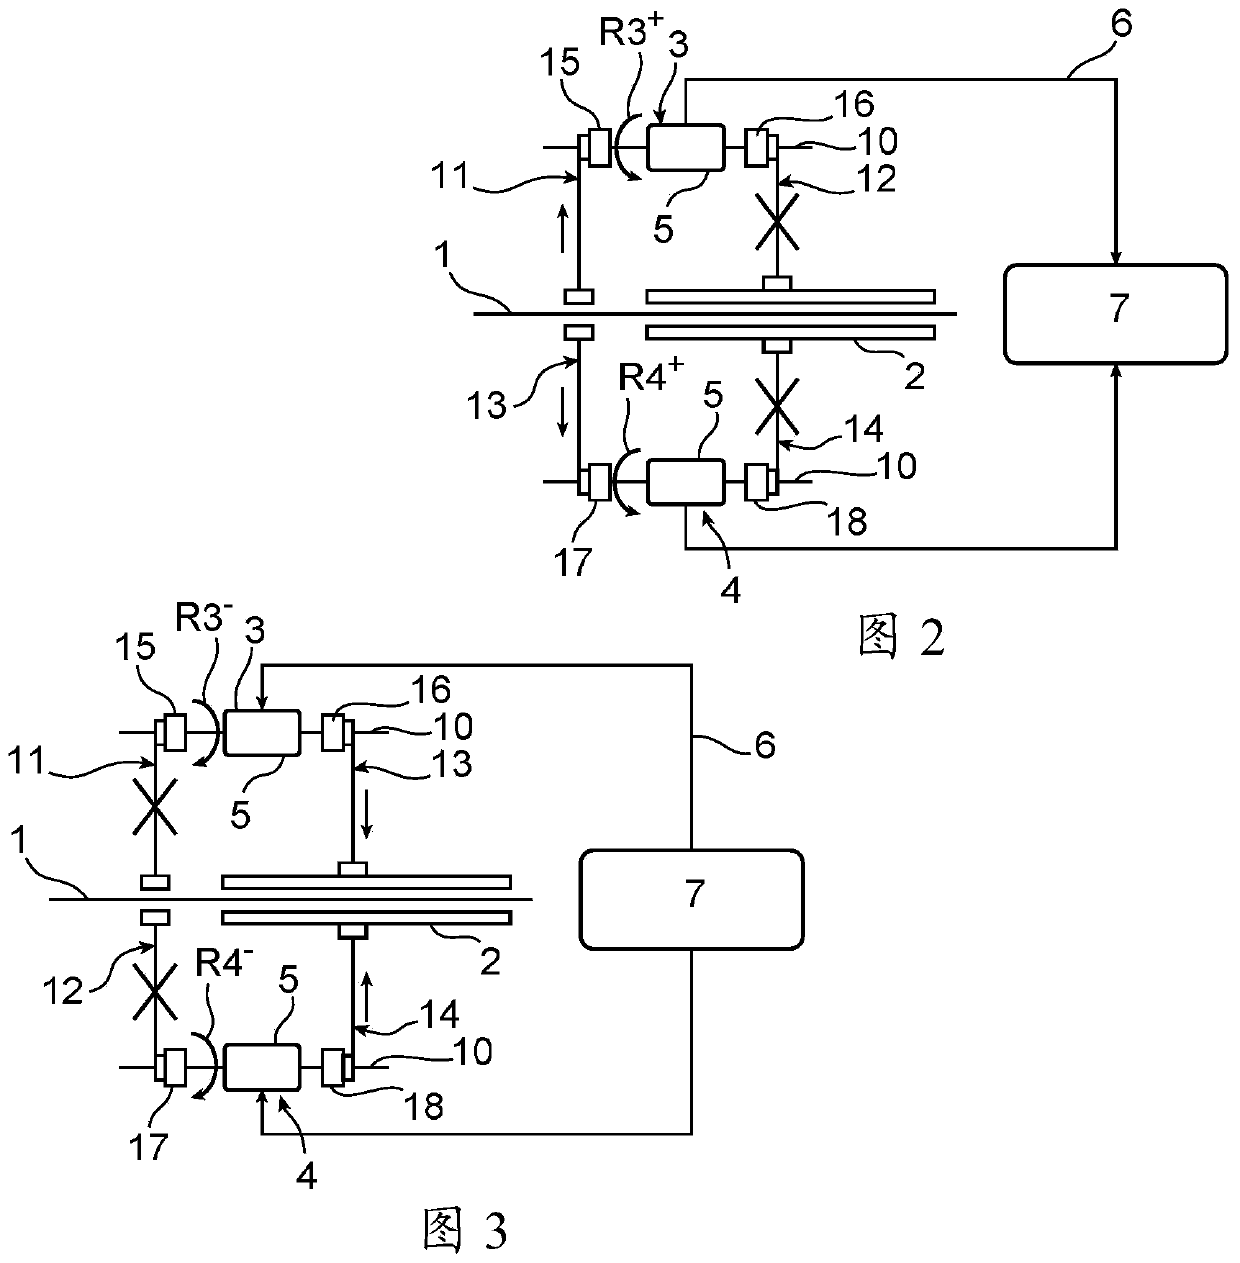 Hybrid propulsion architecture for an aircraft comprising a motor with two reversible electric machines mounted on two shafts